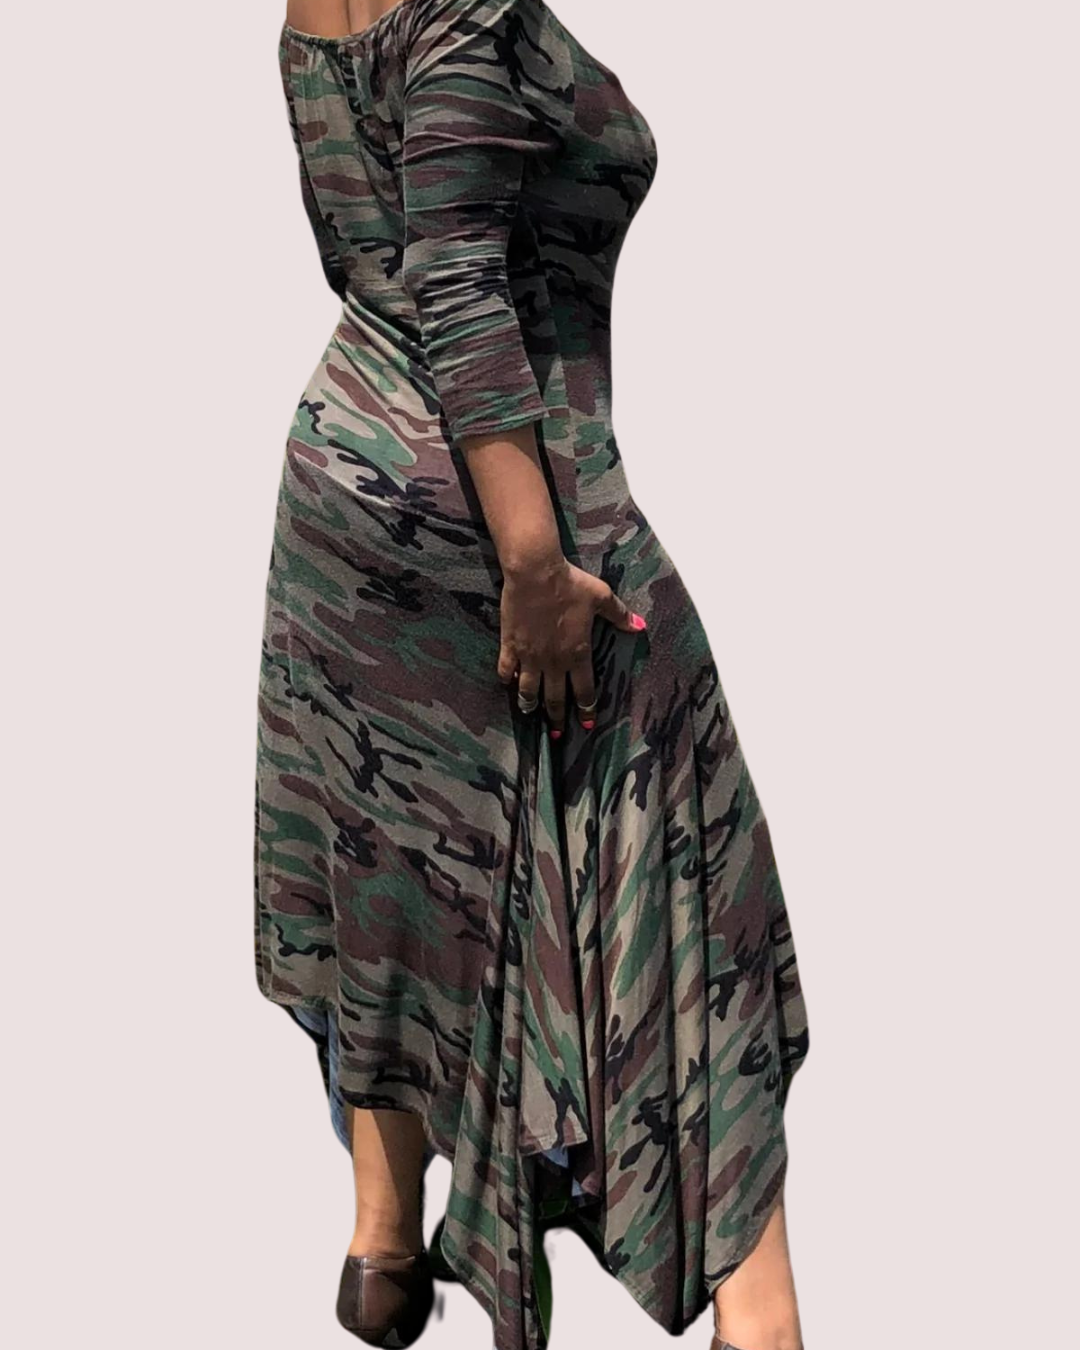 Camouflage Dress T Styles Online